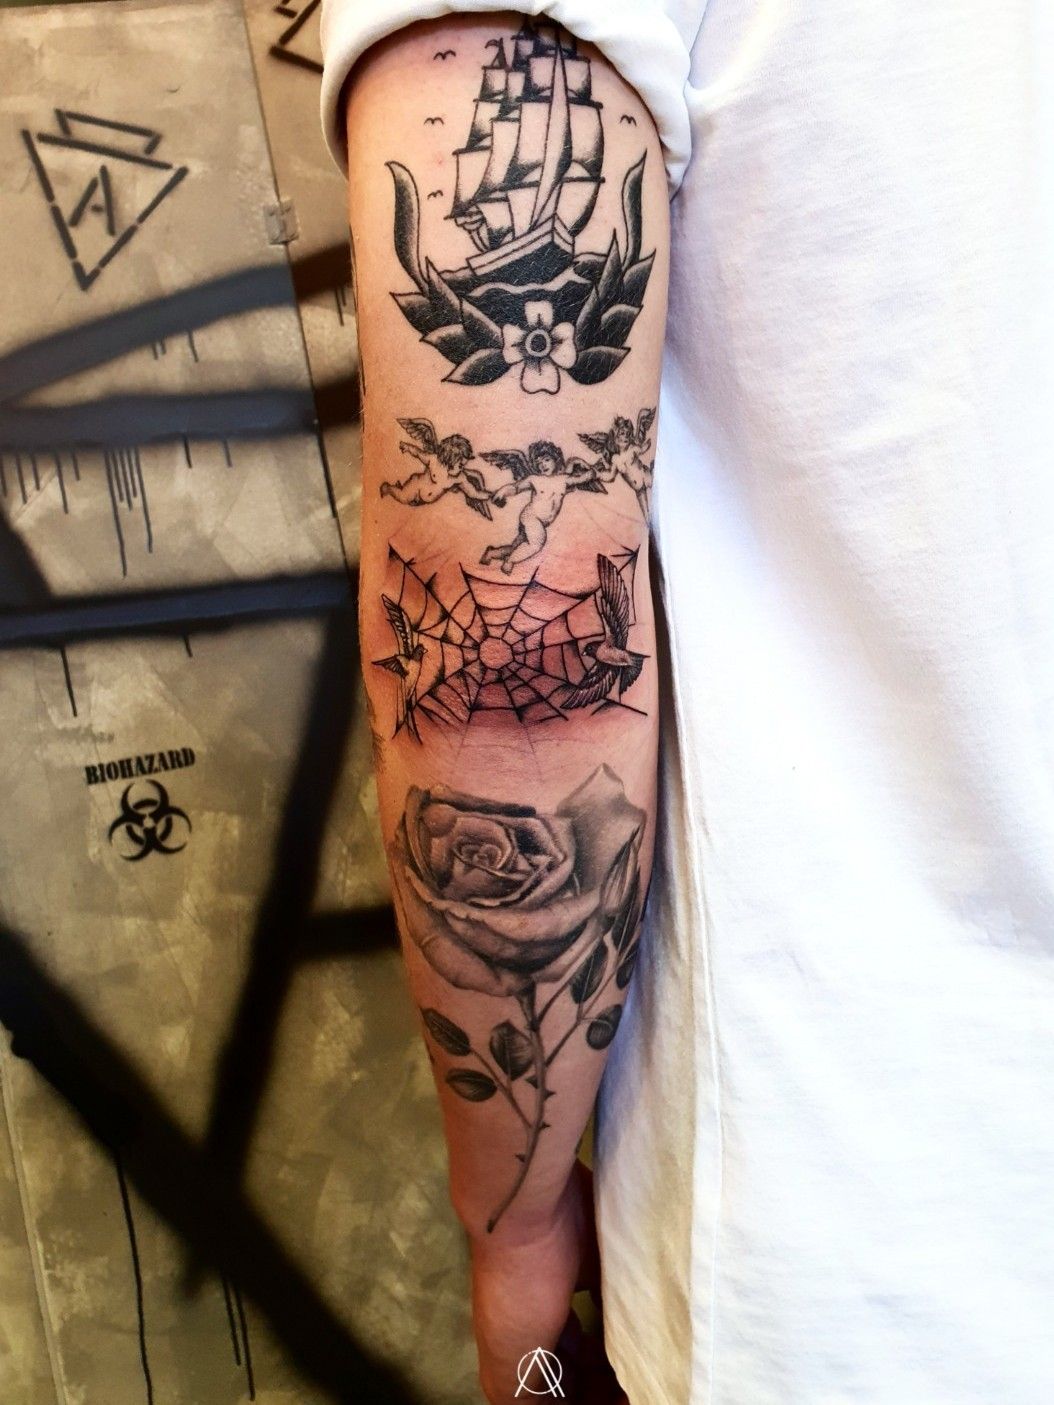 does anyone know what style of tattoos these are i dont like the idea of  a sleeve but would love lots of different tattoos all over my arms   rTattooDesigns